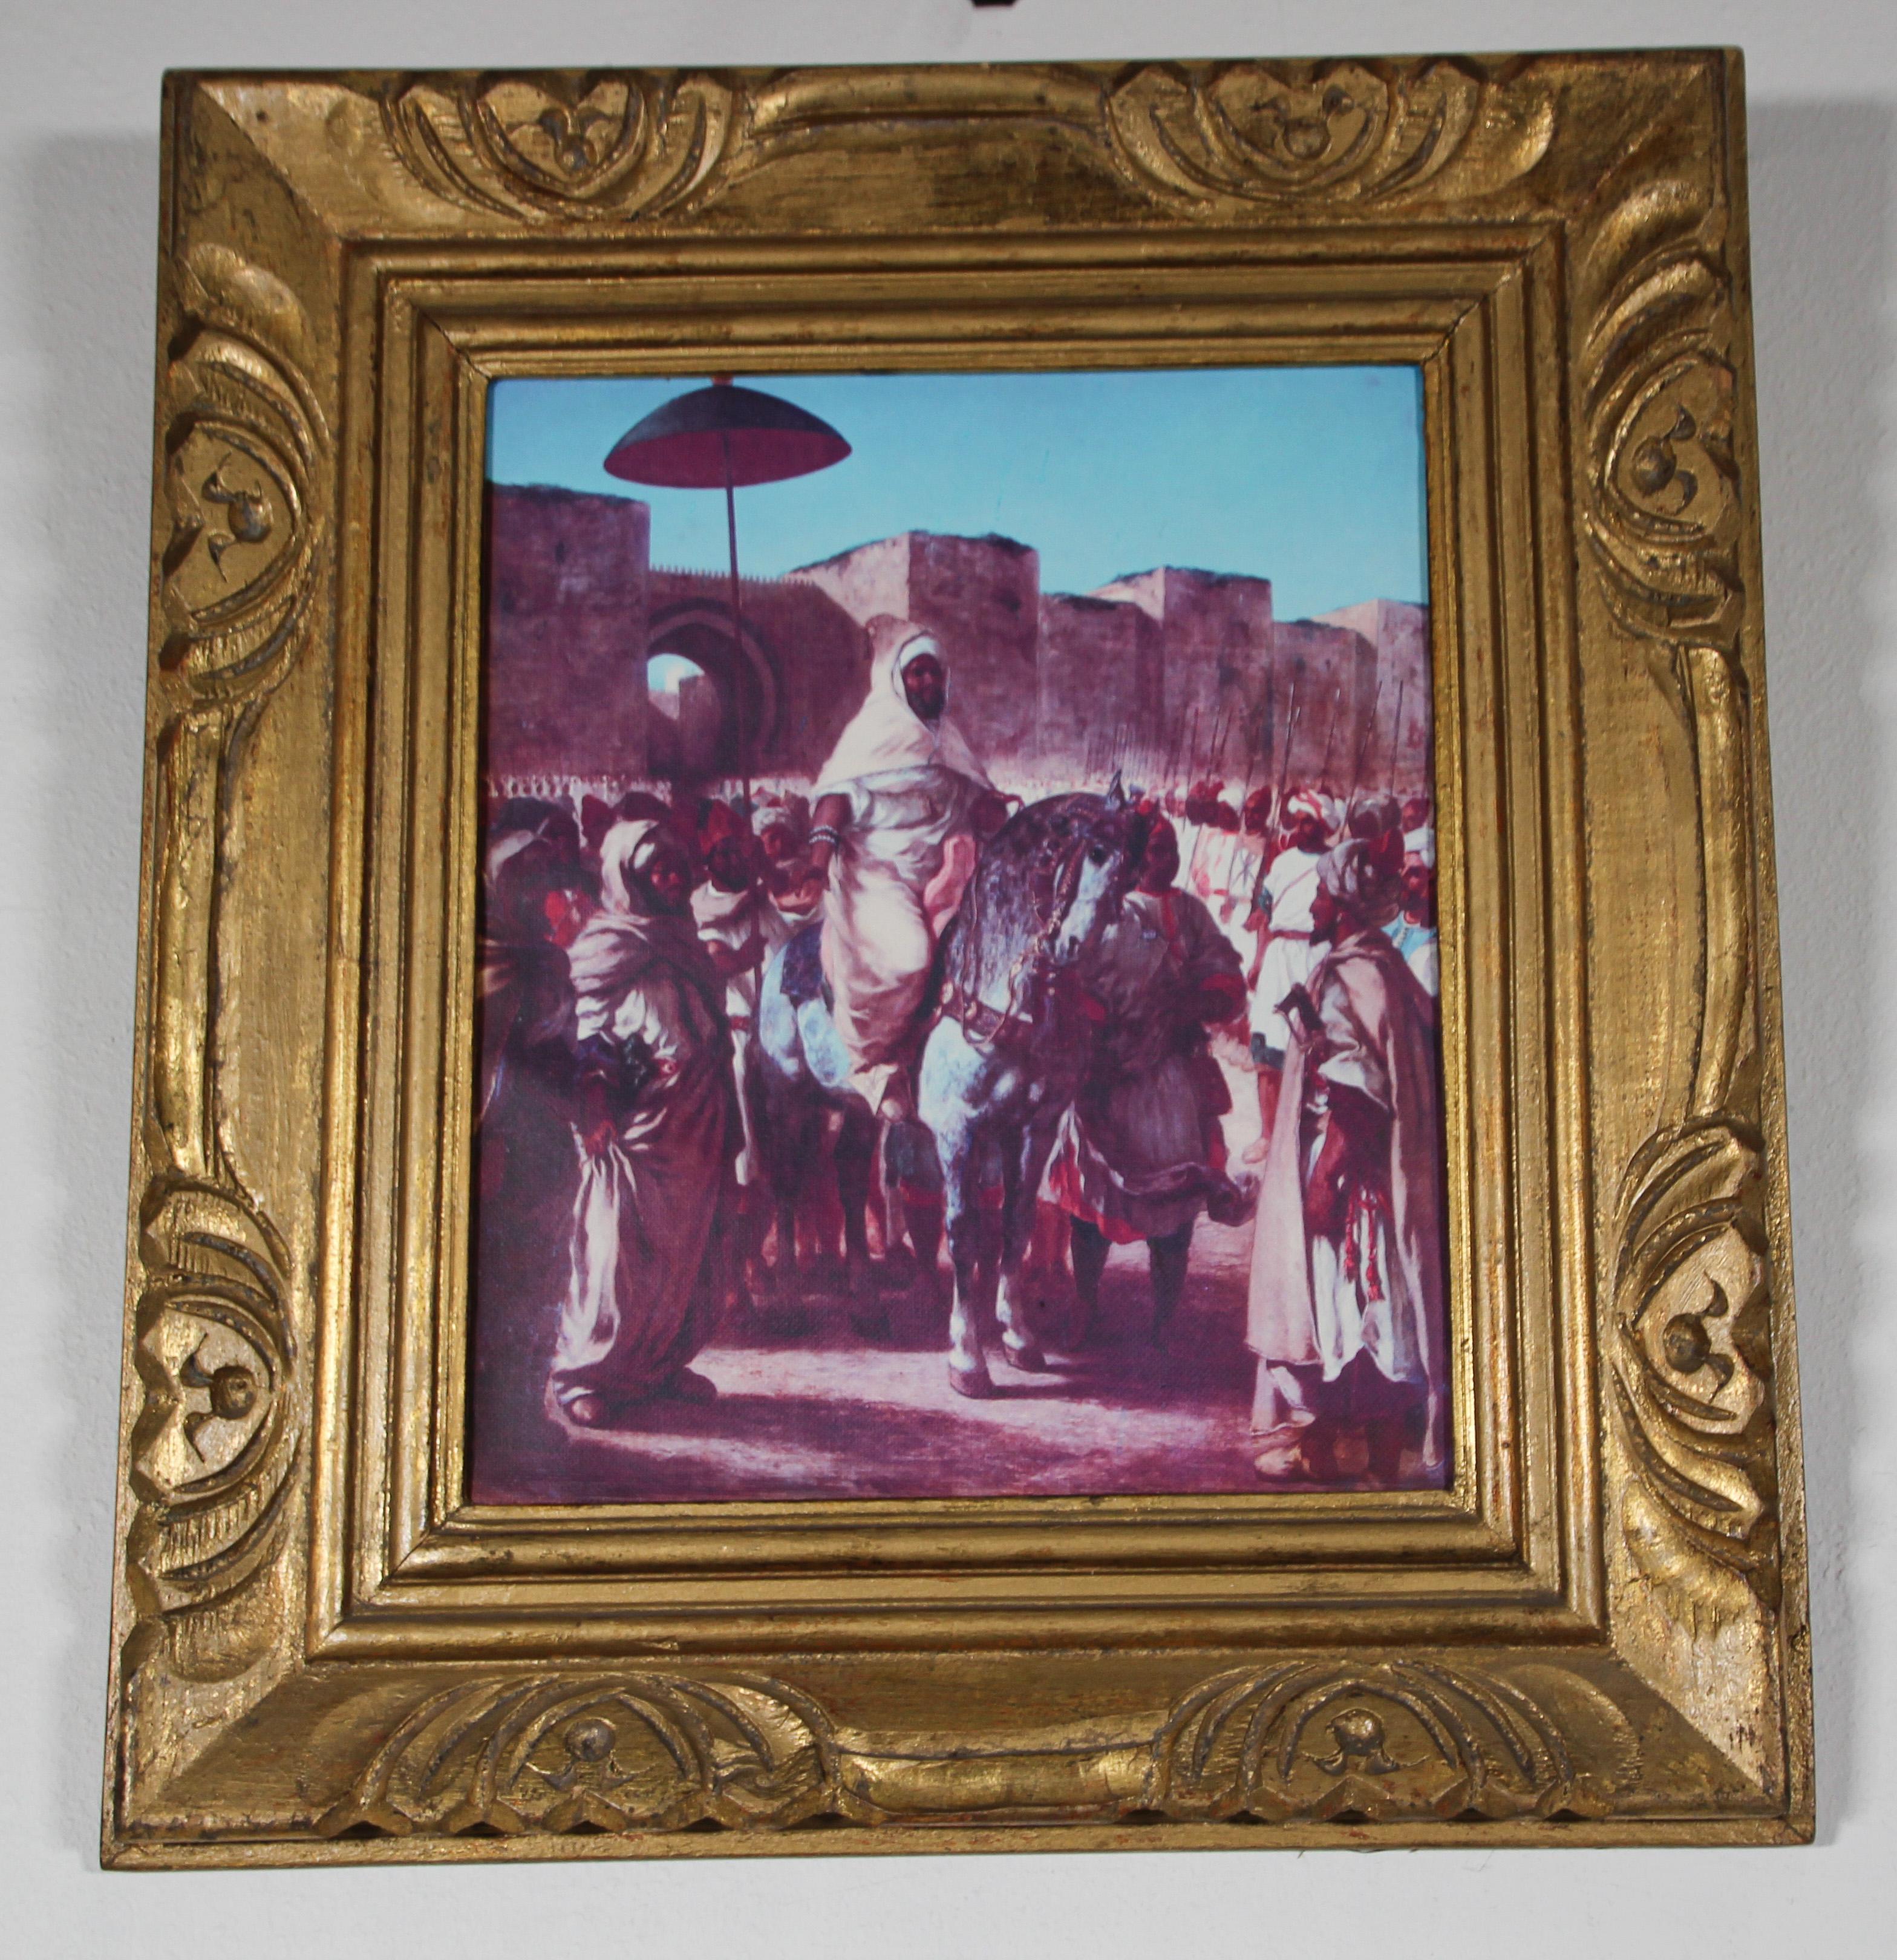 Hand-Crafted Moroccan Orientalist Framed Giclee